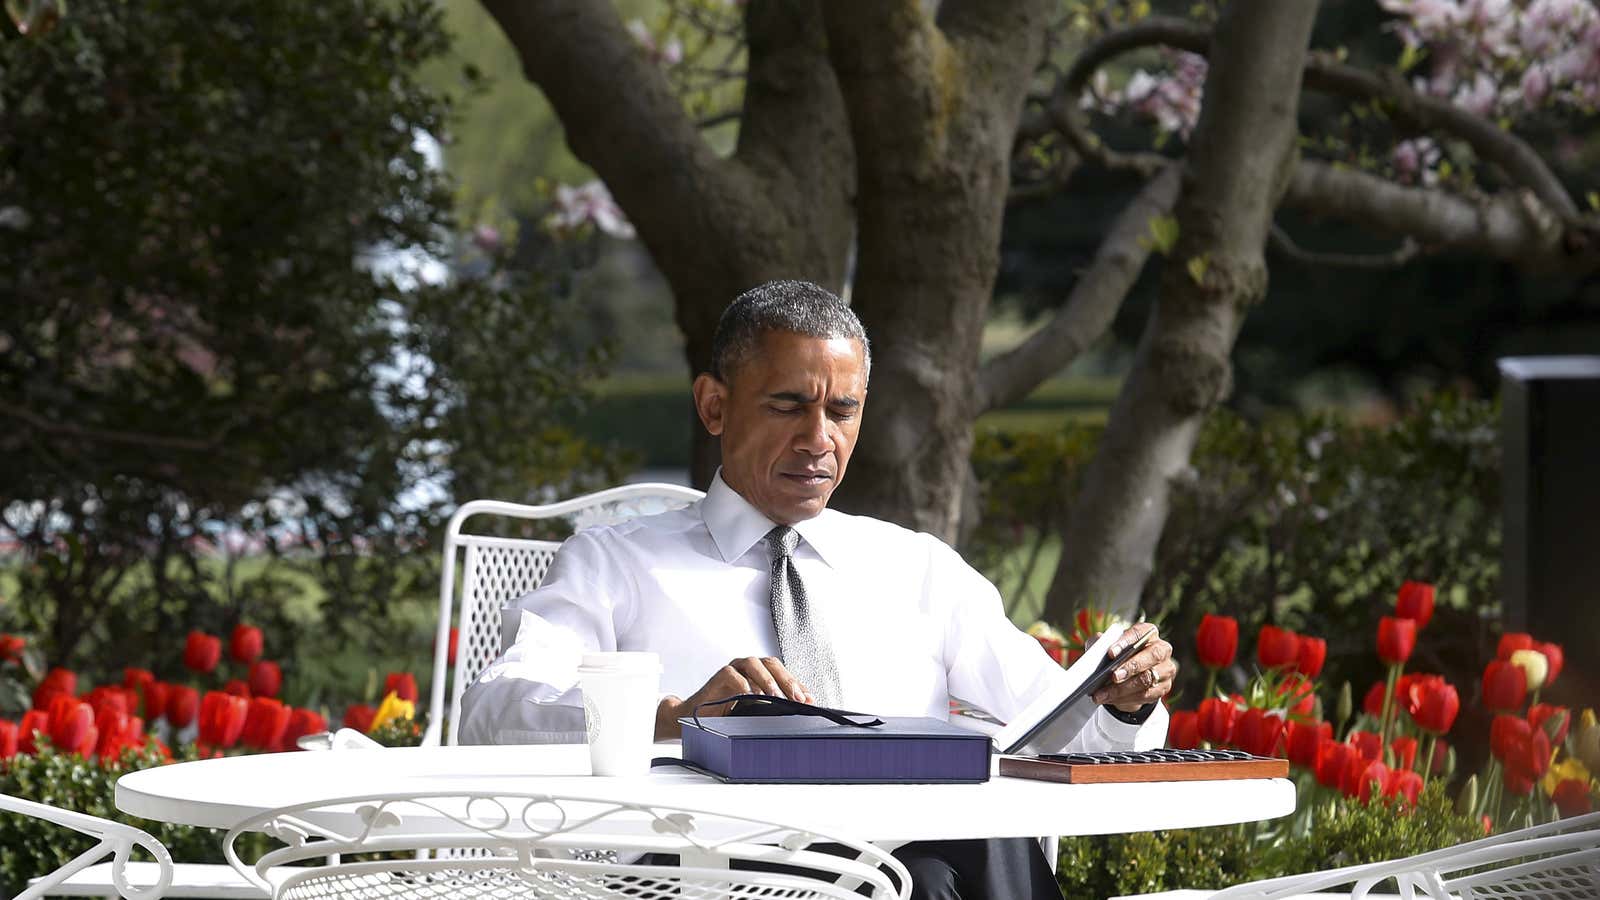 Barack Obama read an hour a day while president.